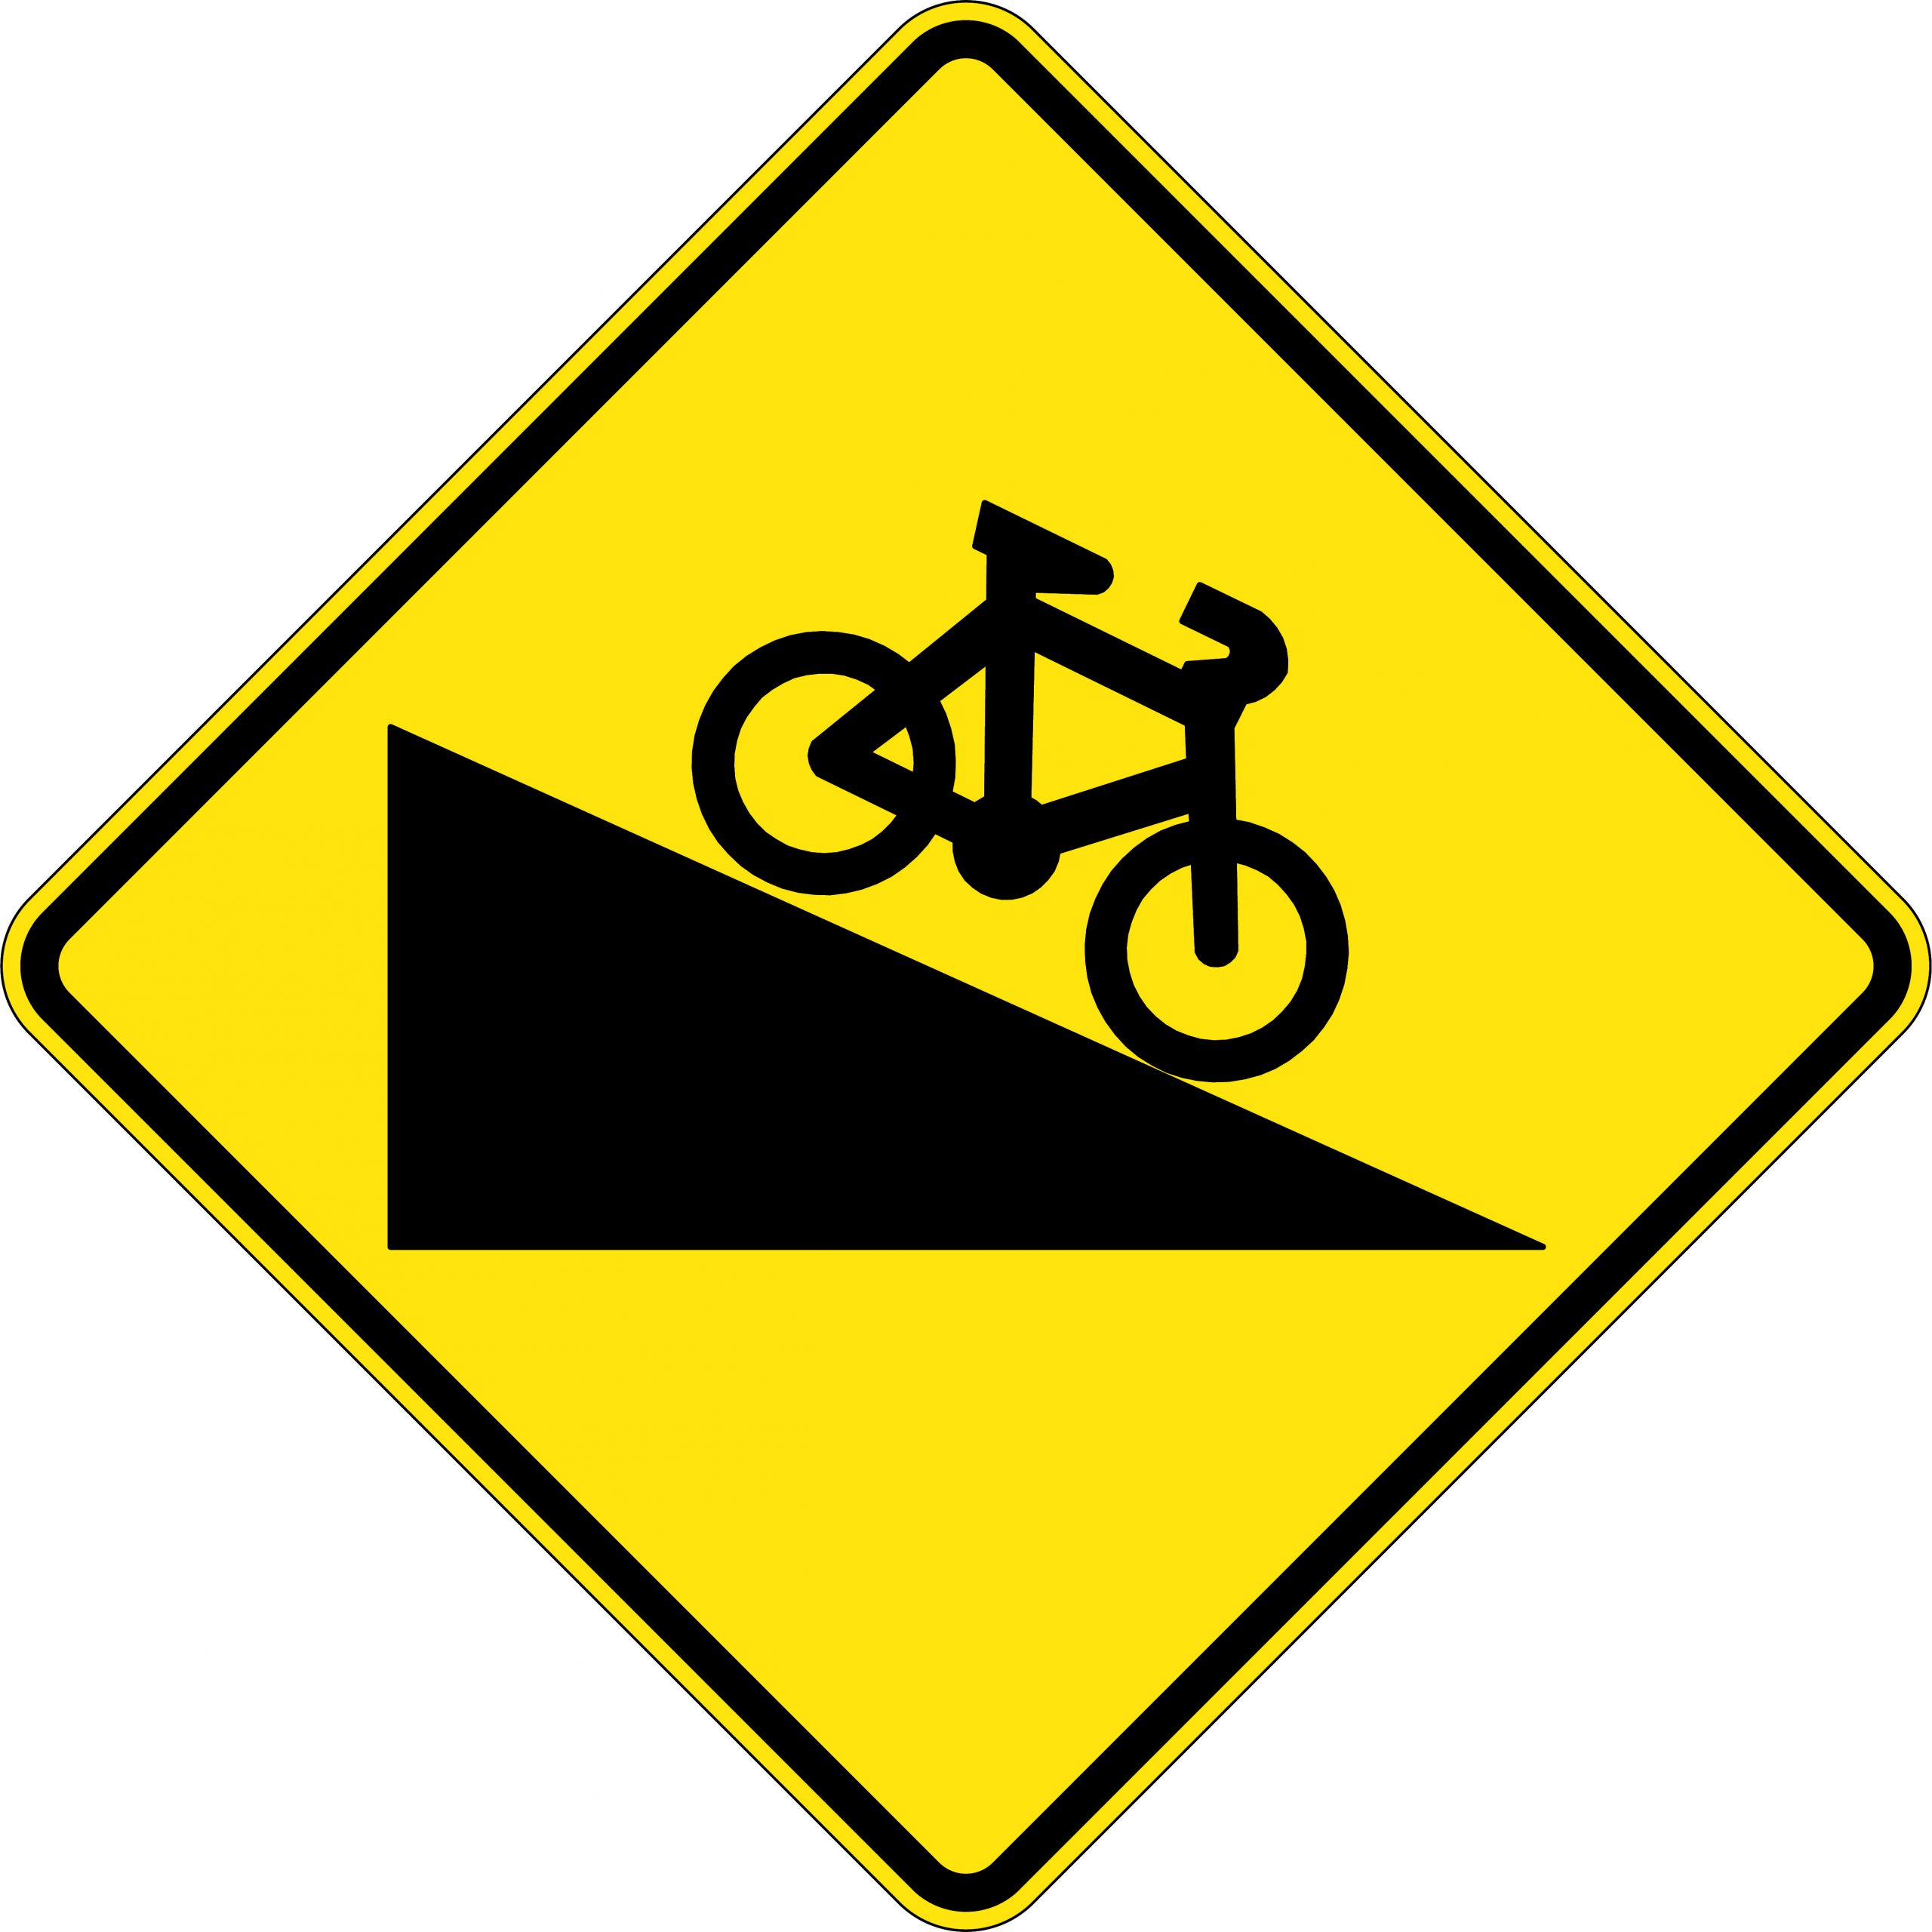 UNIFORM SAFETY 600X600MM ALUM CL1 REF STEEP DESCENT FOR BICYCLES